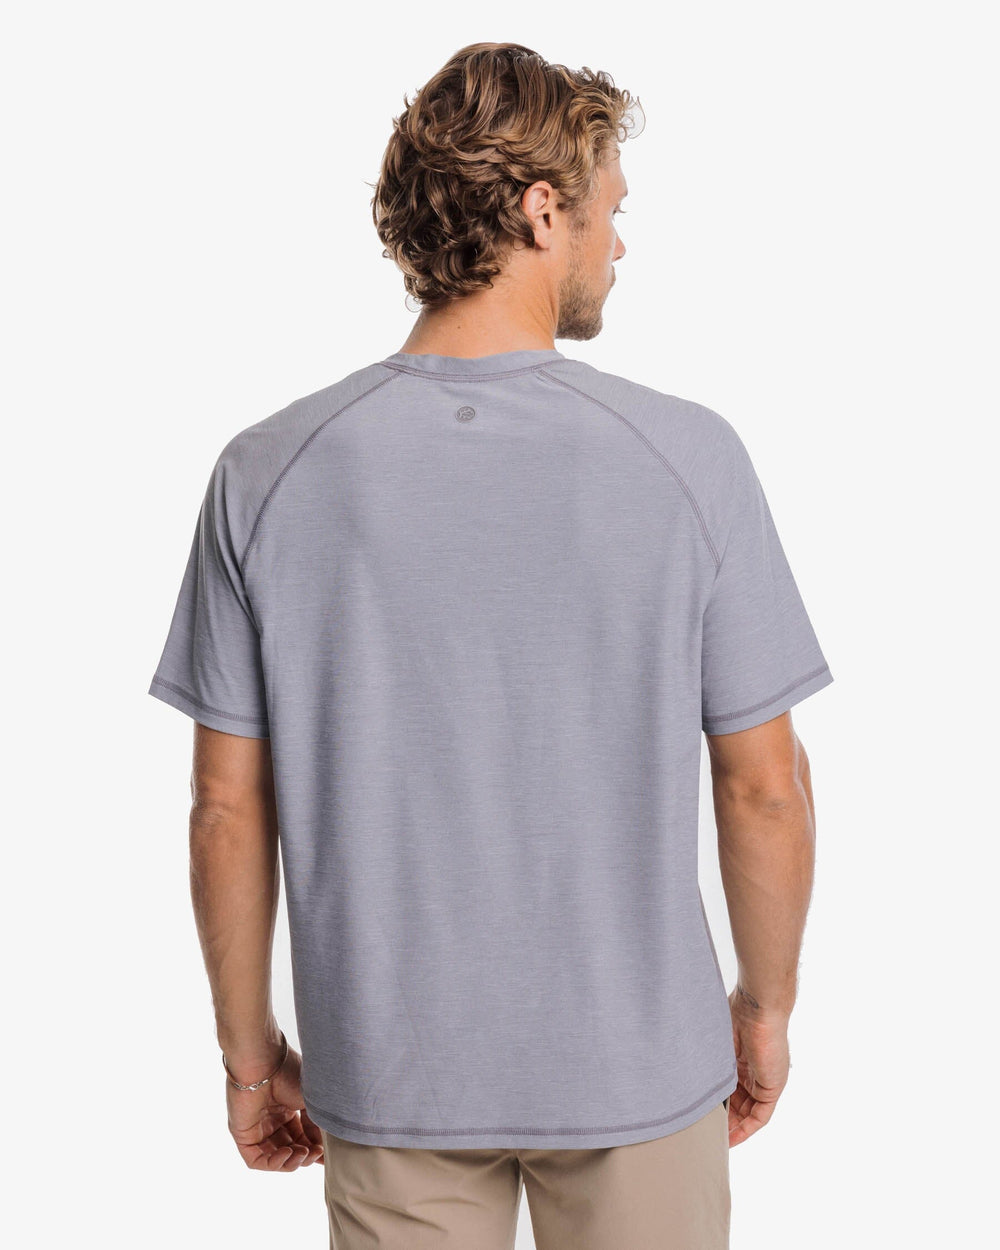 The back view of the Southern Tide brrr°®-illiant Performance Tee by Southern Tide - Steel Grey